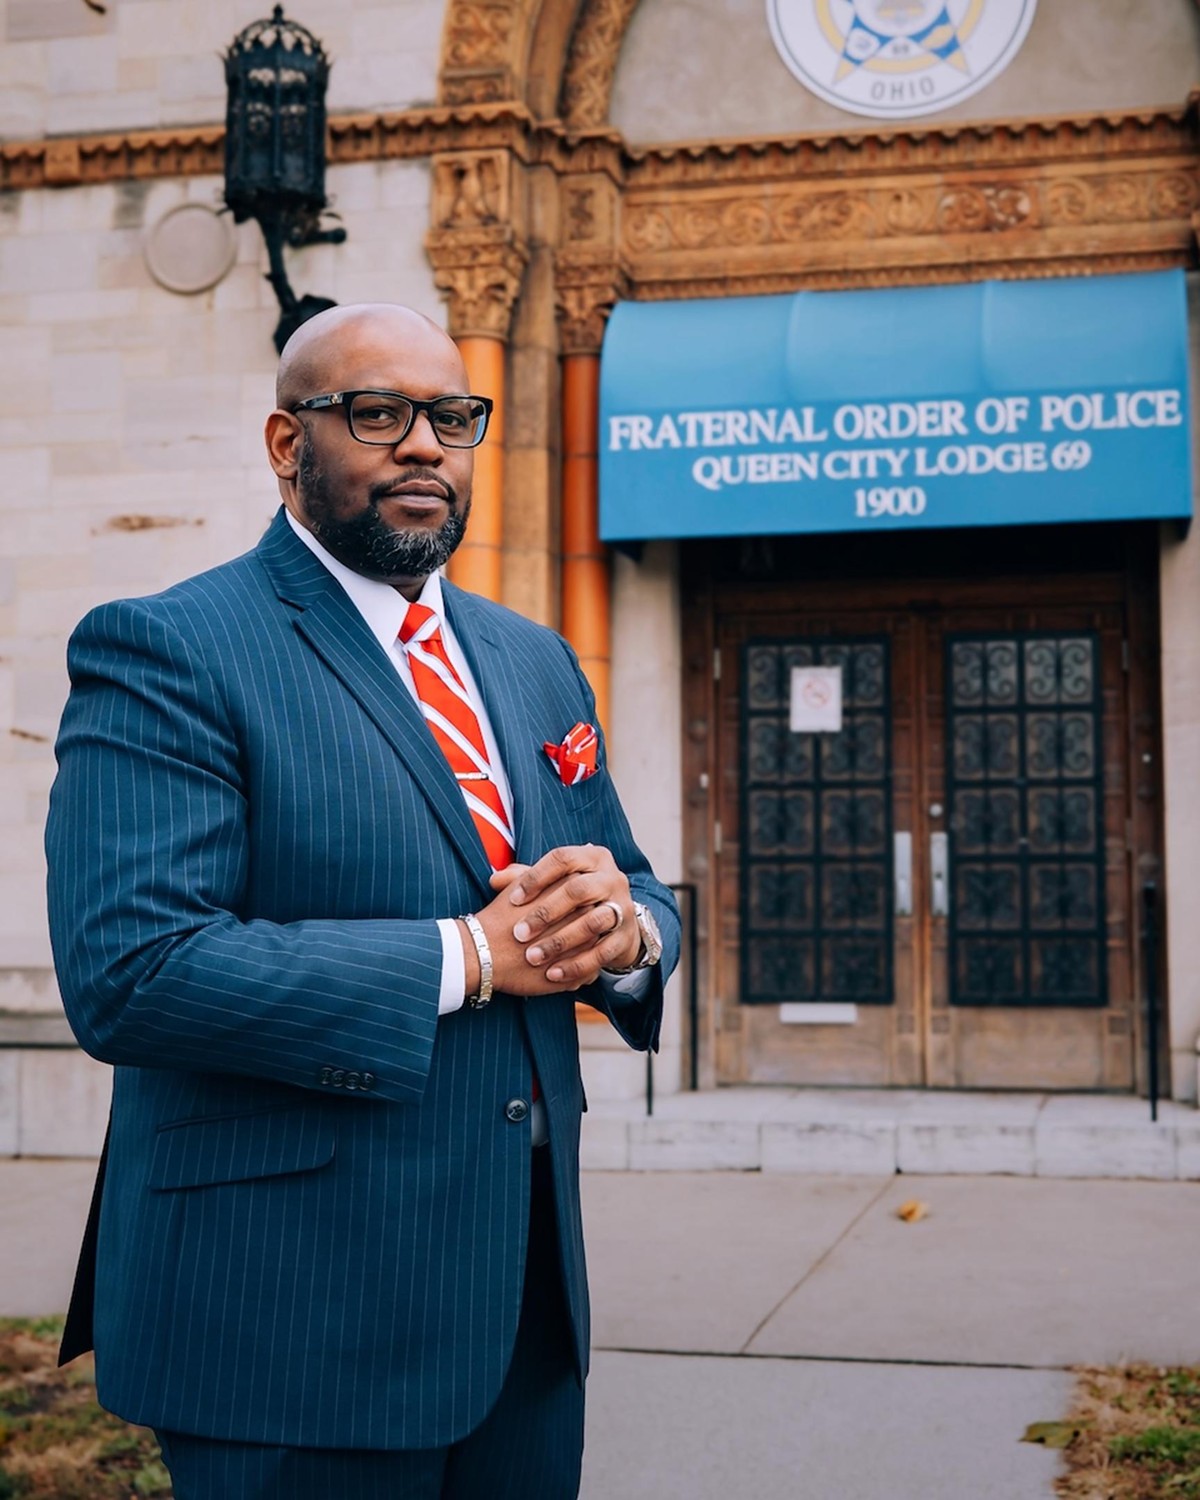 Sergeant Deon Mack of the Cincinnati Police Department is running for president of CPD's Fraternal Order of Police union. He tells CityBeat the role needs a more measured, thoughtful leader.